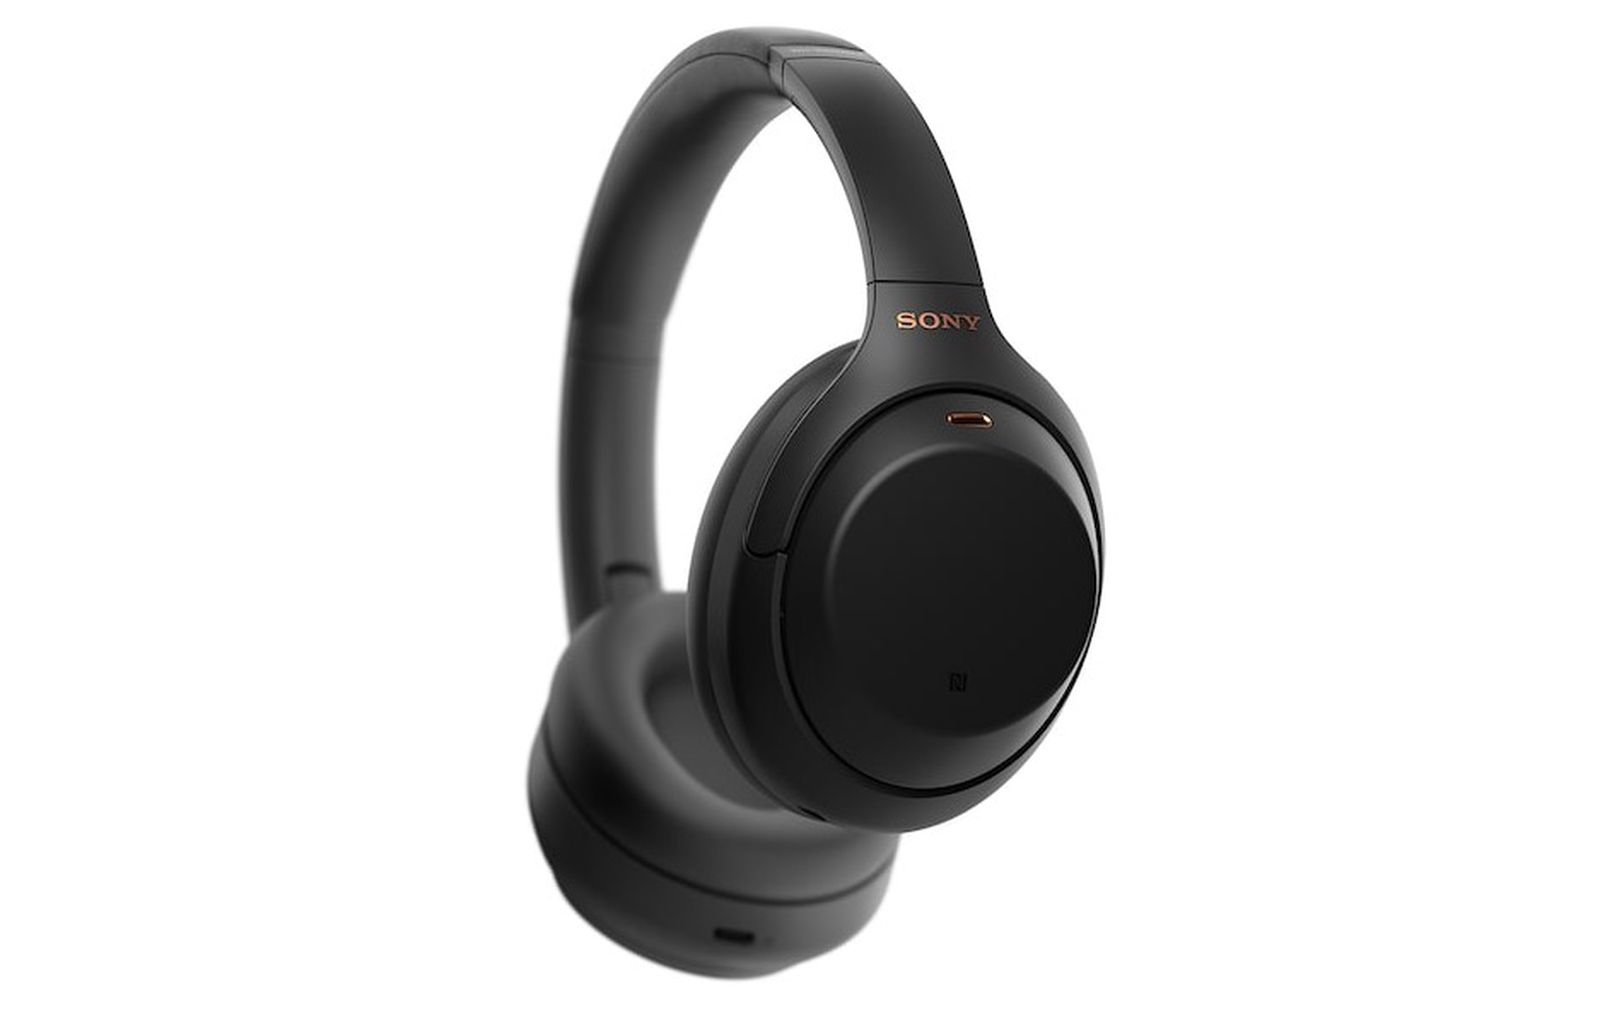 Sony WH-1000XM4 Noise-Canceling Headphones Now Available for $350